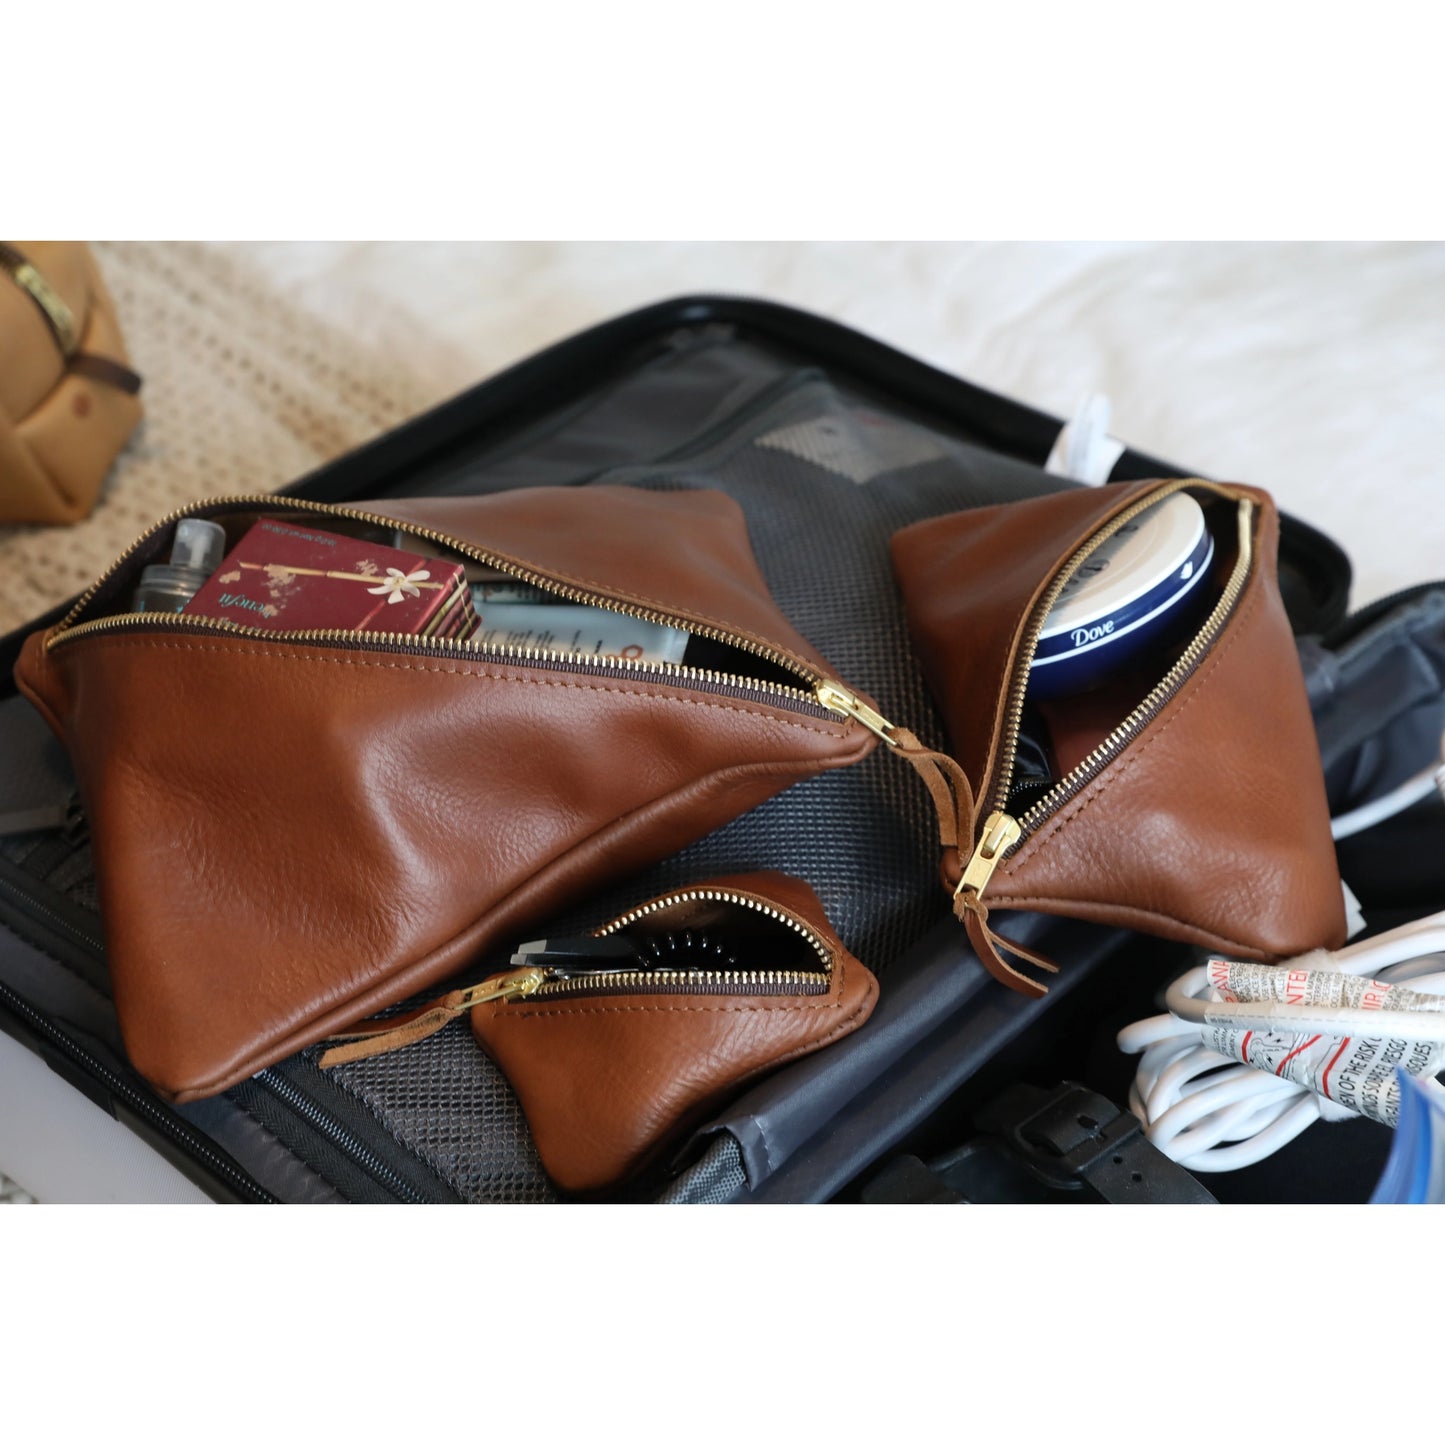 soft leather toiletry bags